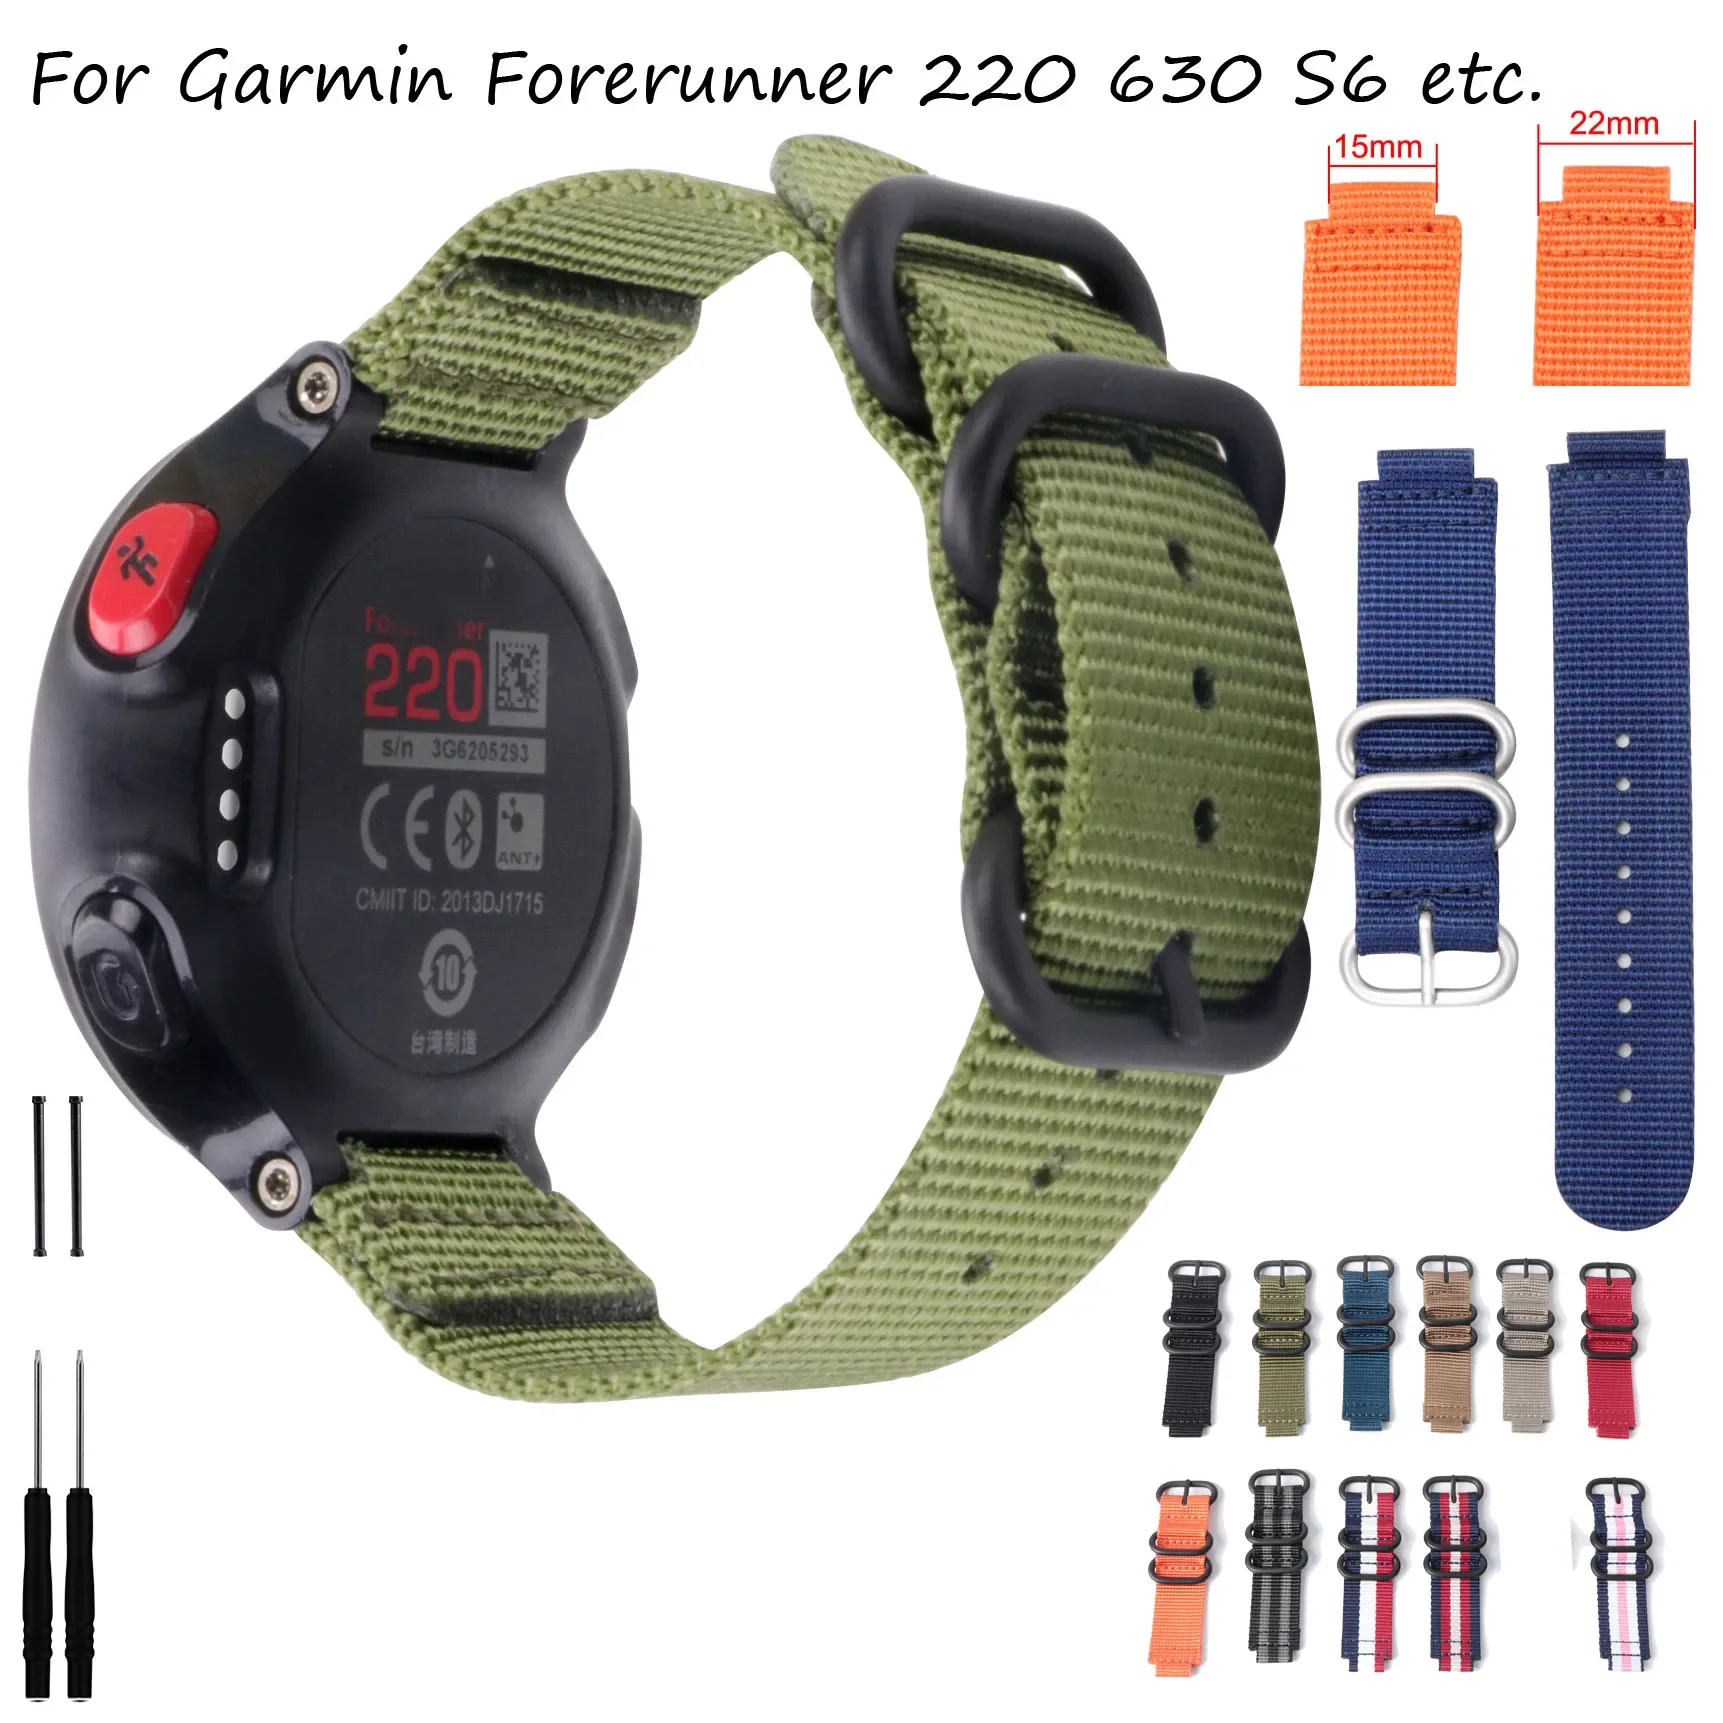 22mm-15mm Soft Nylon Watch Strap For Garmin Forerunner 220 235 620 630 735 S5 S6 S20 Watch Band Replacement Wrist Bracelet